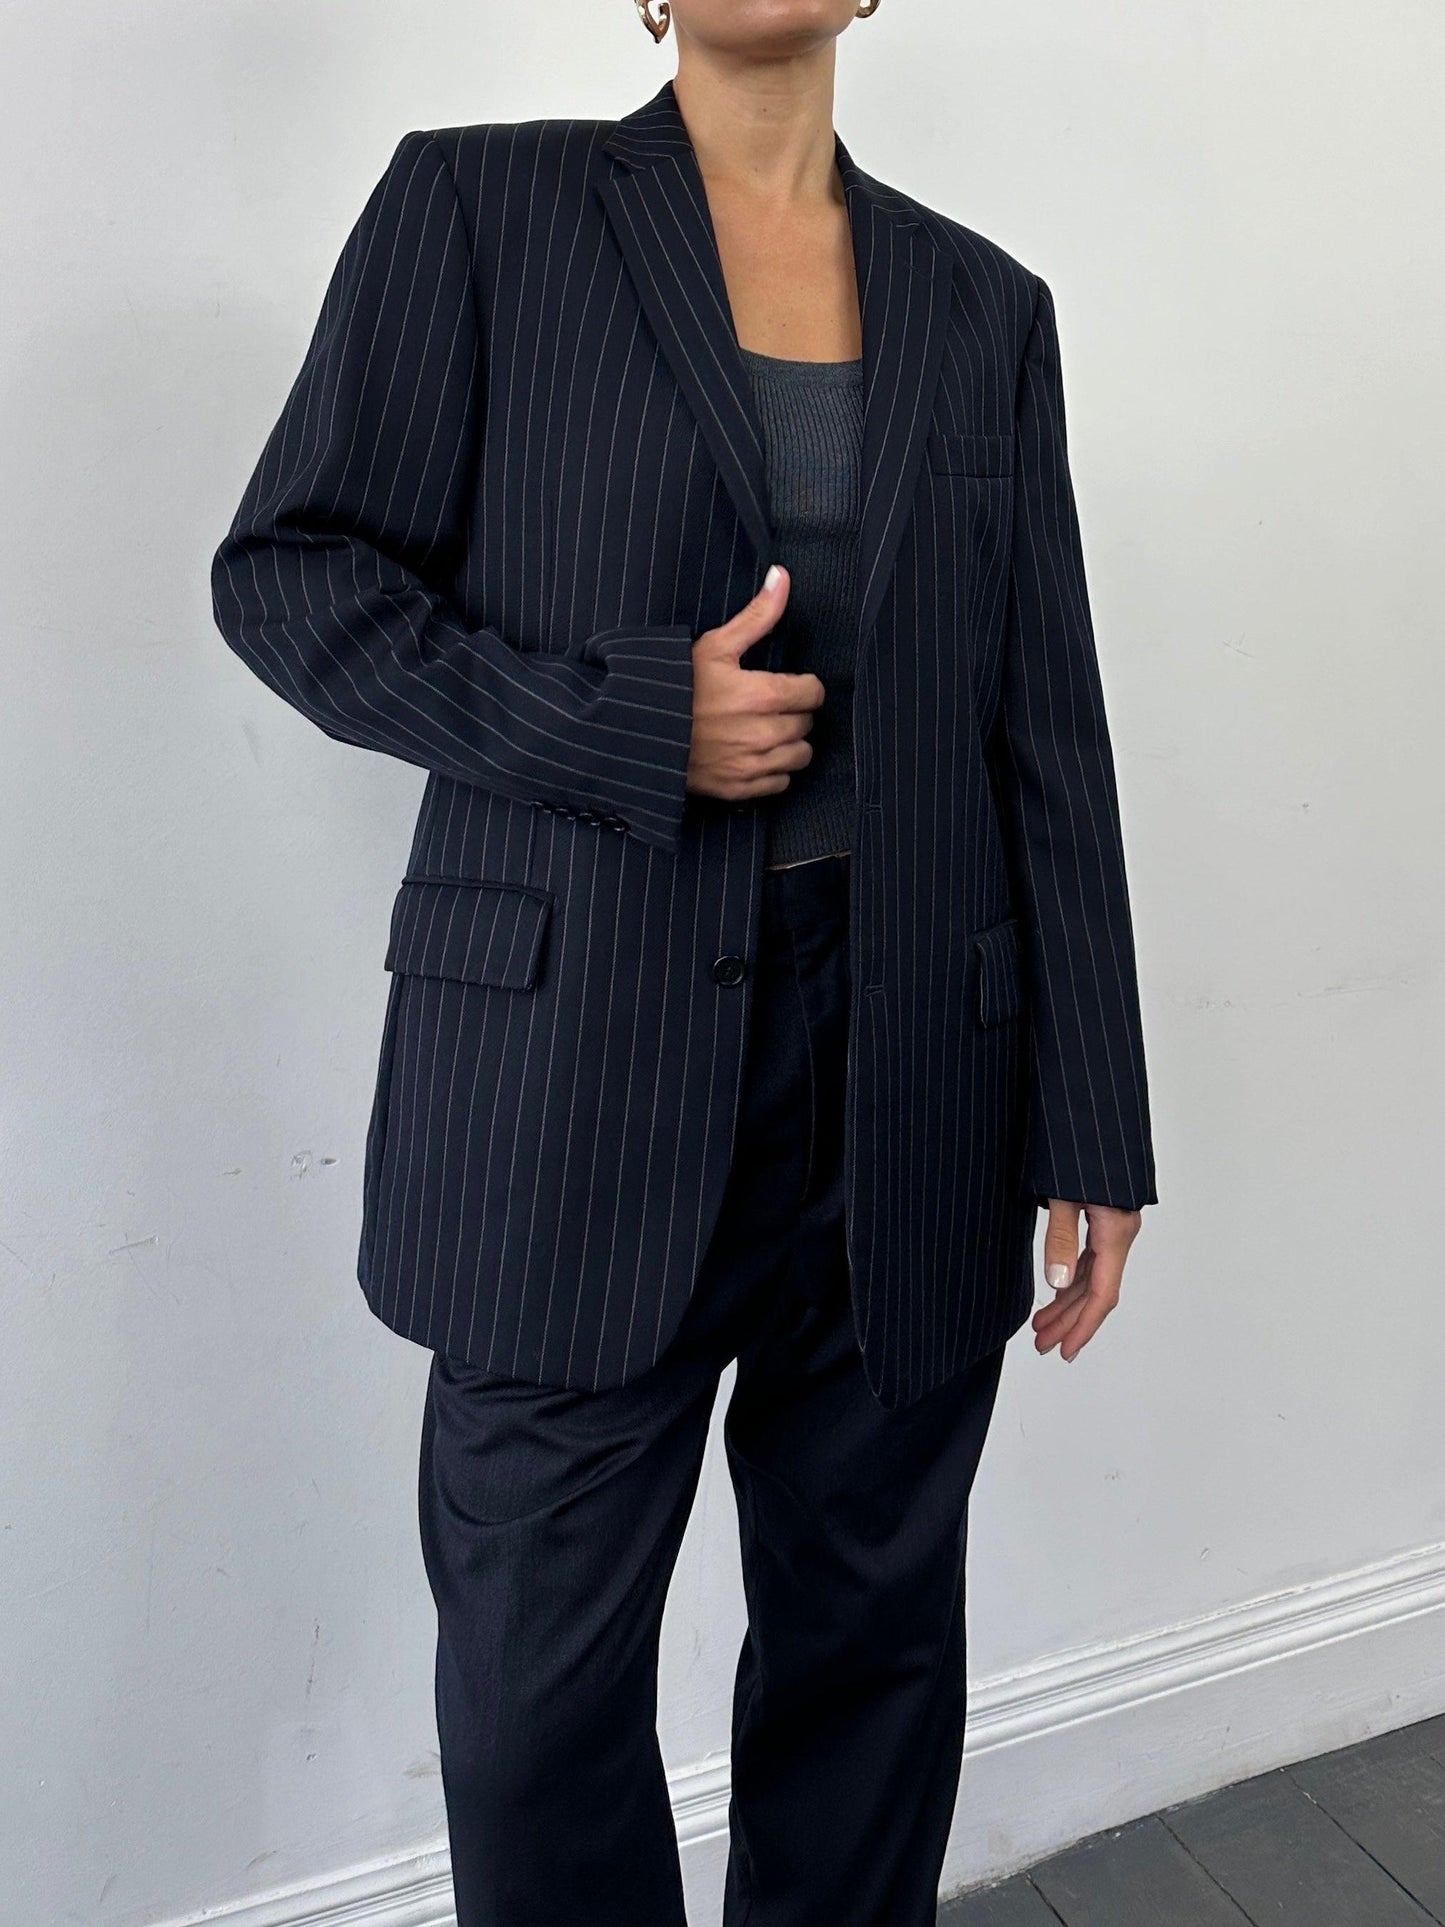 Vintage Pinstripe Pure Wool Single Breasted Blazer - 42R/XL - Known Source